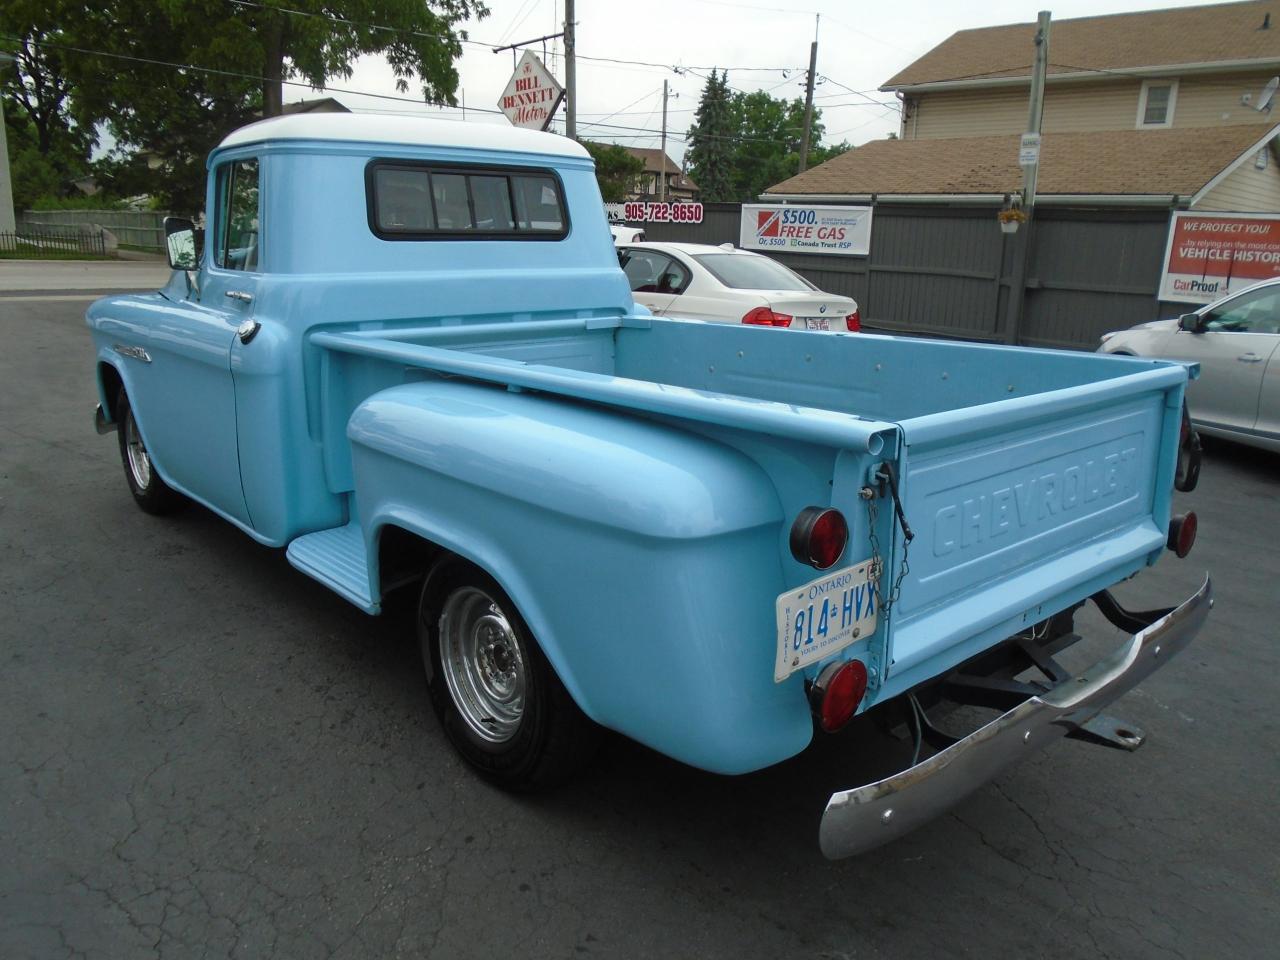 1955 Chevrolet Pickup (Other) 3200 Series Half-Ton Step-Side Long-Box - Photo #11